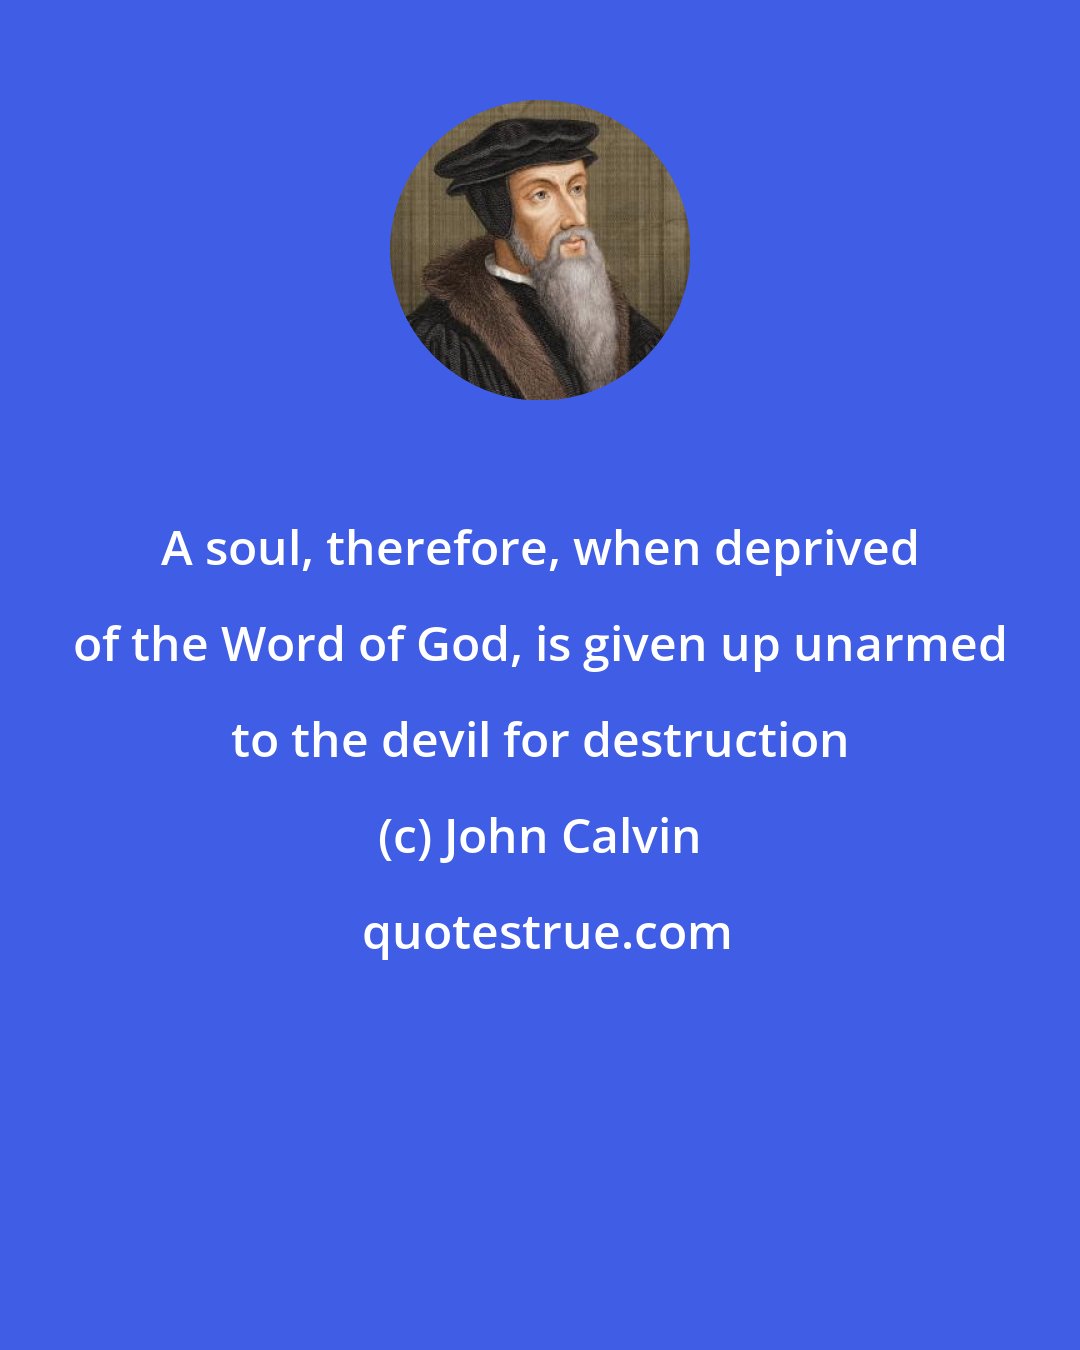 John Calvin: A soul, therefore, when deprived of the Word of God, is given up unarmed to the devil for destruction